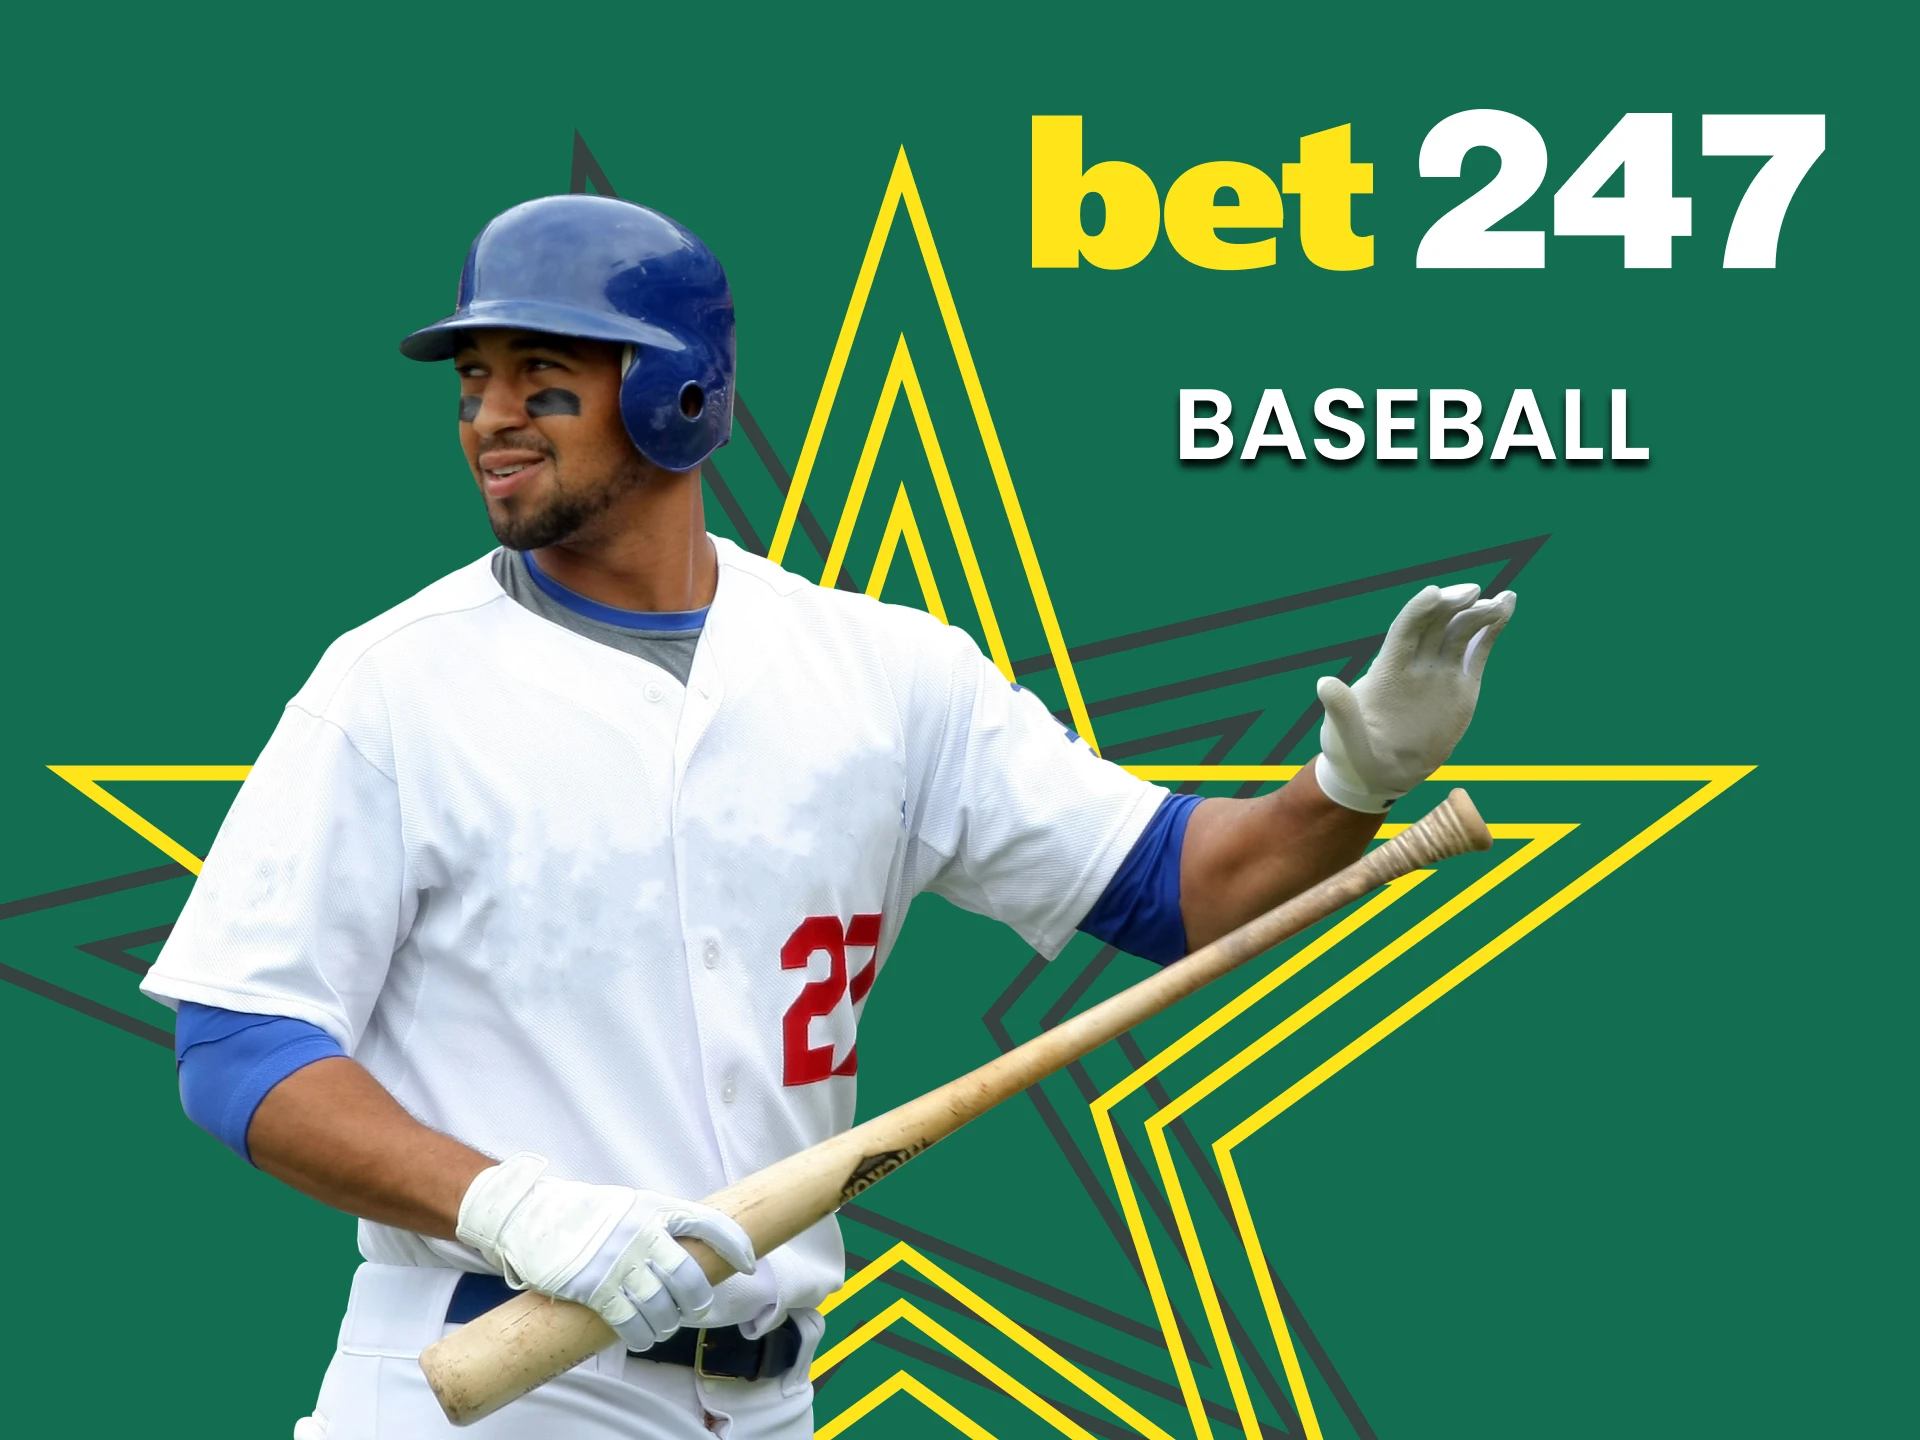 Bet on baseball with Bet247.